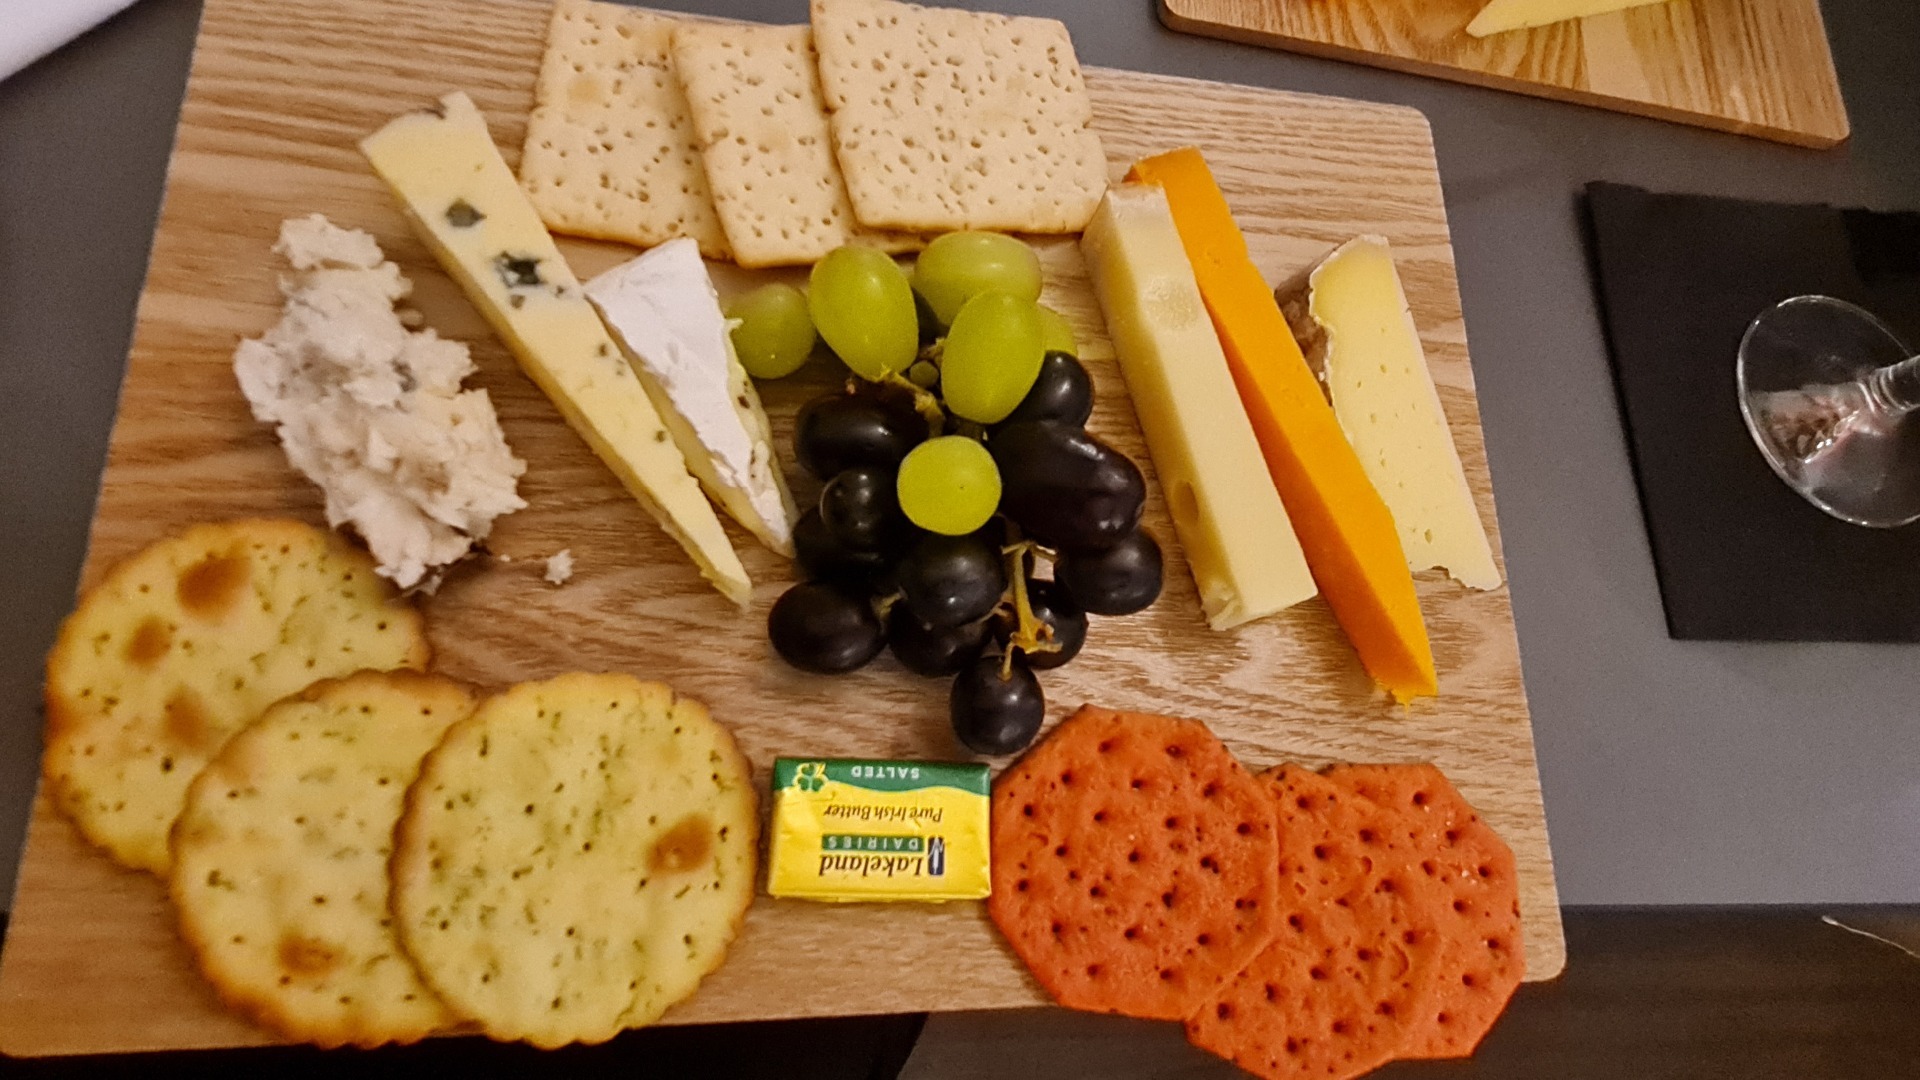 Gorgeous cheese selection